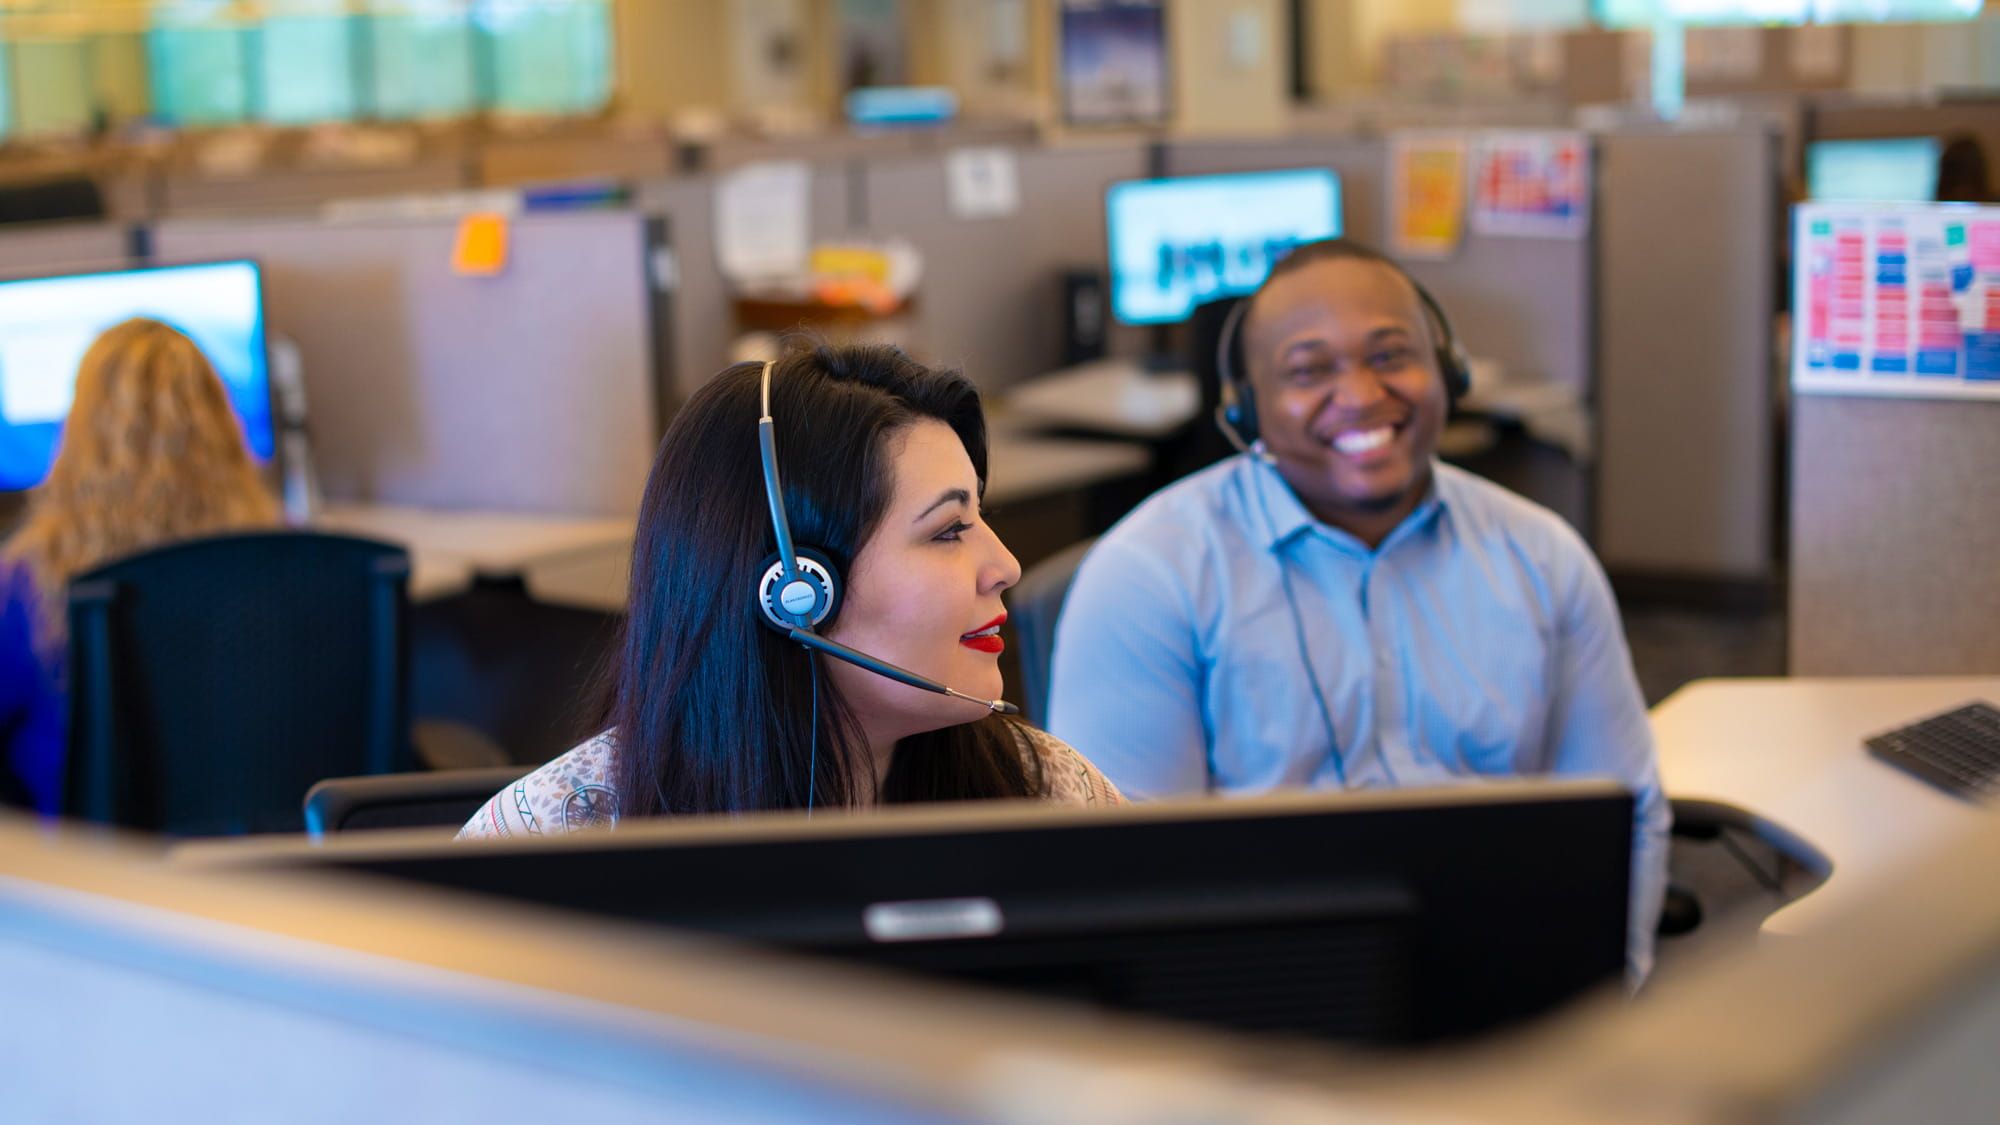 Team members in a call center smiling at each other